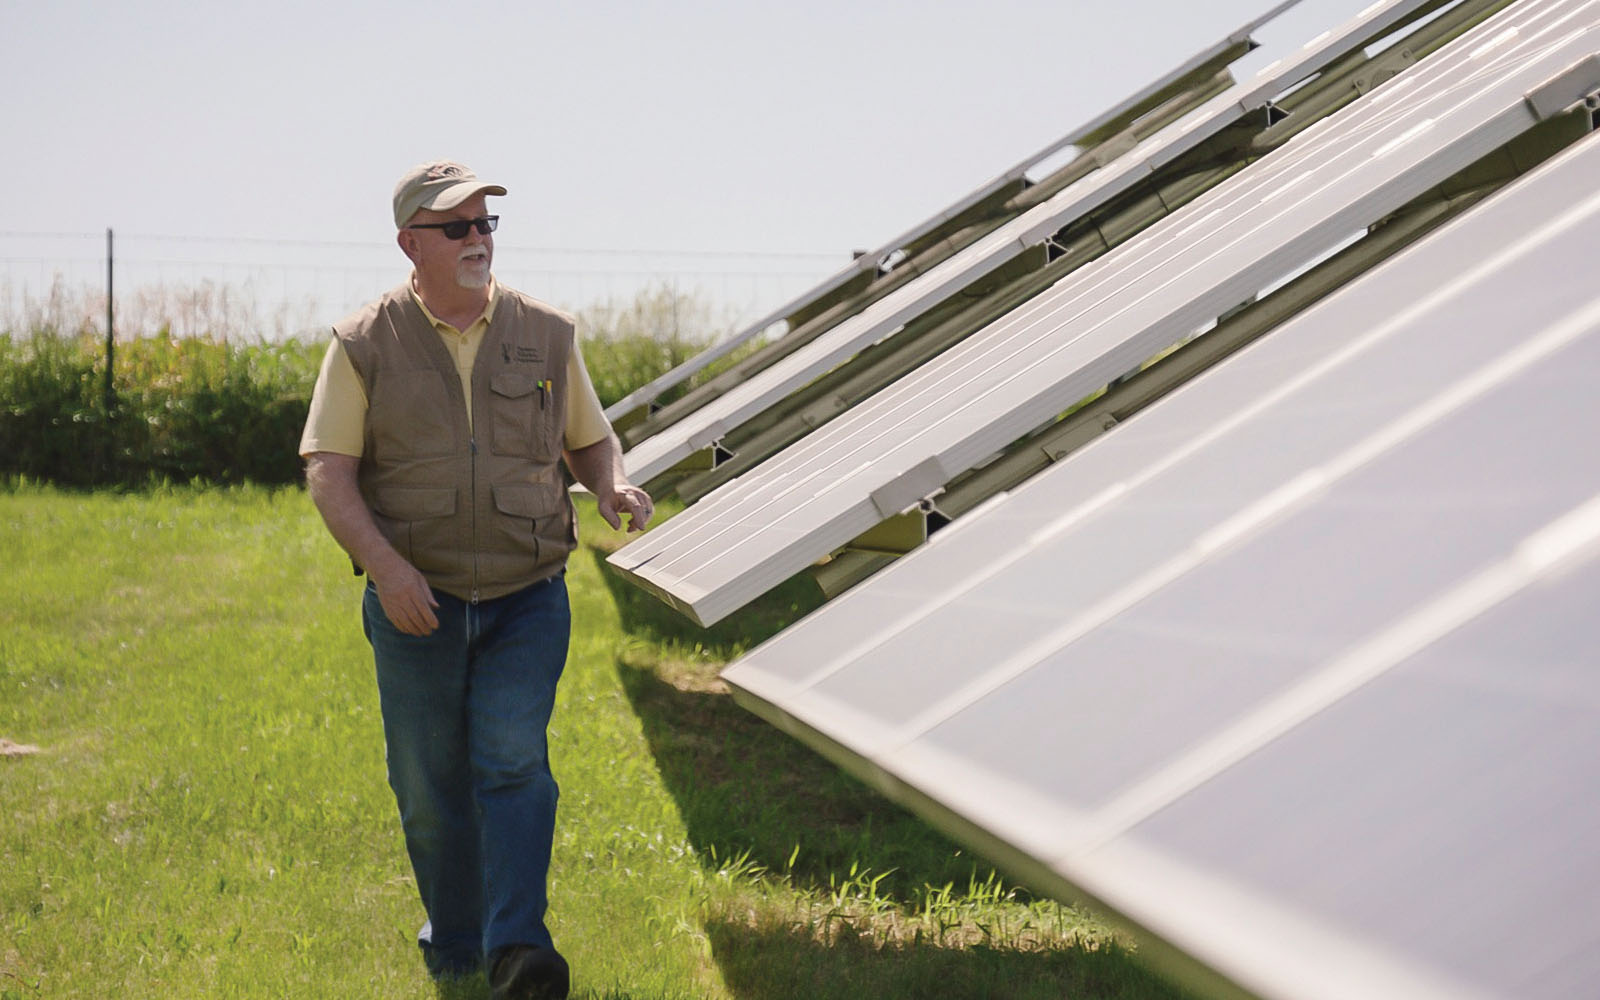 Scene from the documentary, visiting a solar farm at Farmers Electric Cooperative in Kalona, Iowa.